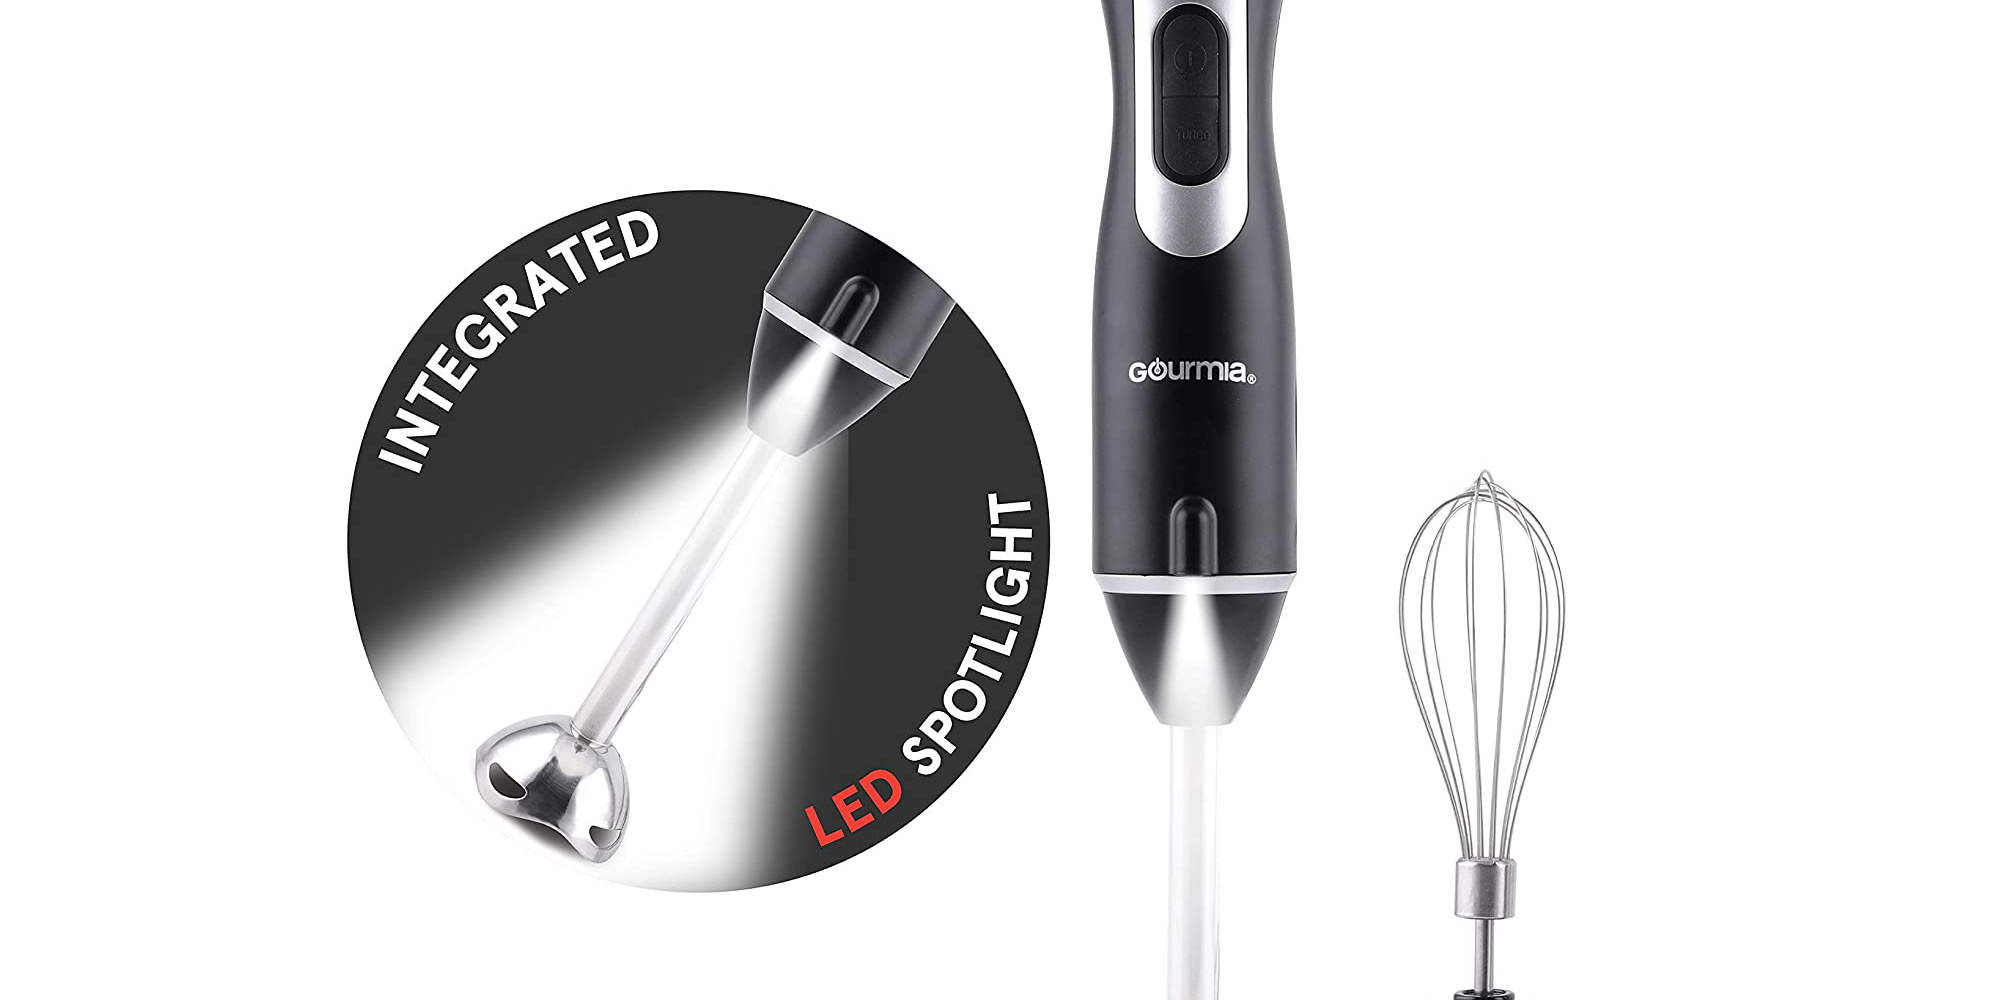 https://9to5toys.com/wp-content/uploads/sites/5/2021/08/Gourmia-12-Speed-Illuminating-Immersion-Hand-Blender.jpg